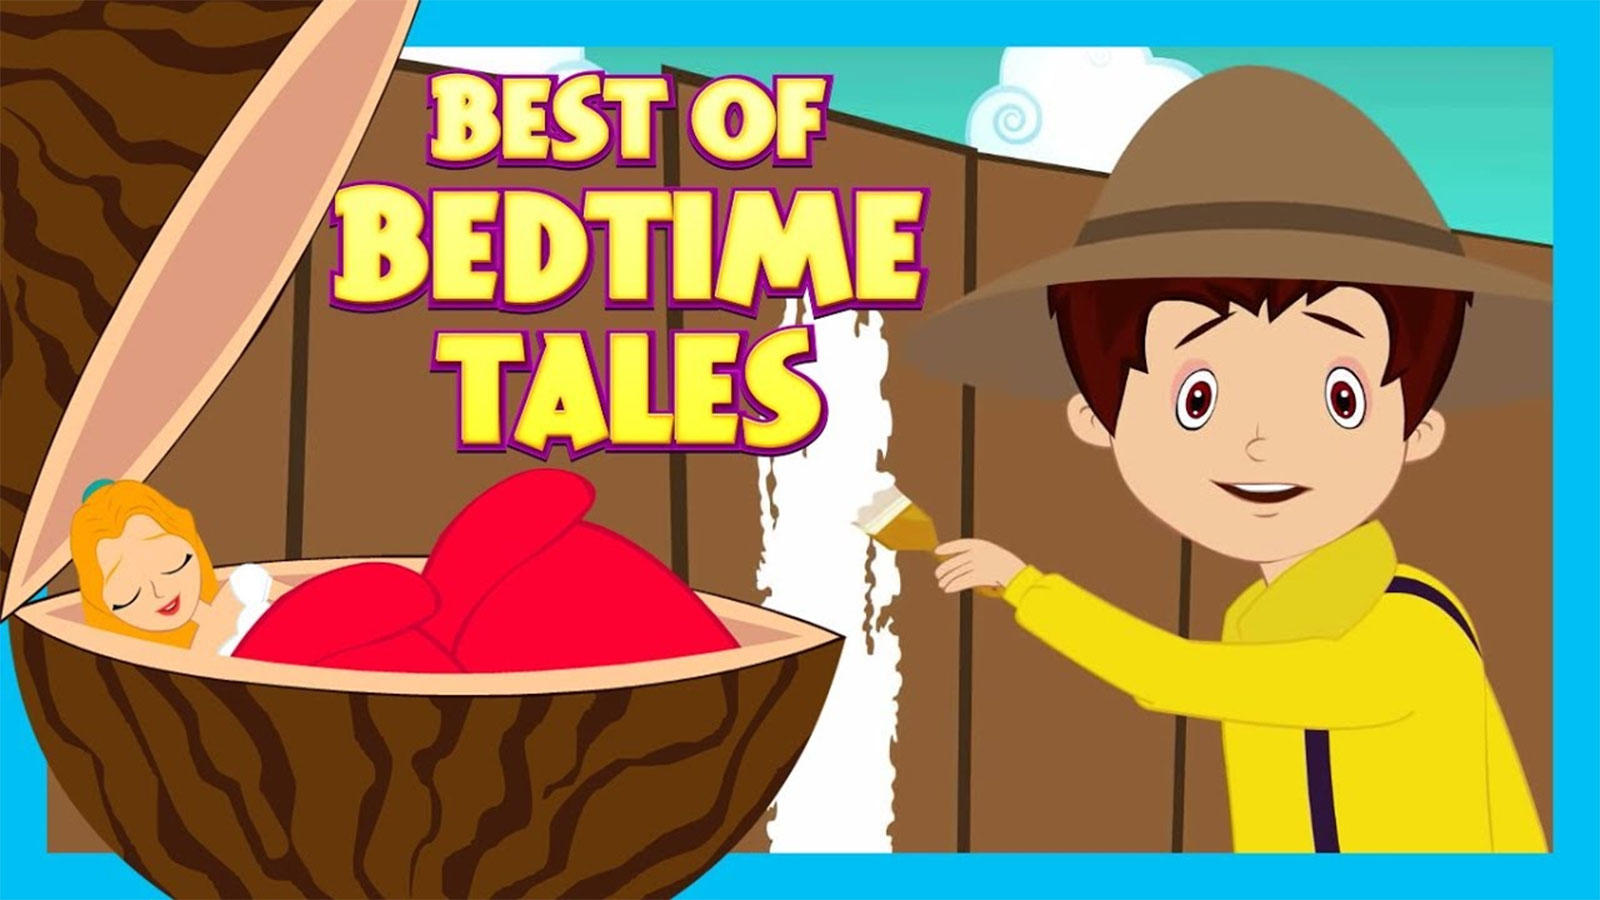 Popular Kids Songs and English Nursery Story 'Thumbelina and Alice In  Wonderland' for Kids - Check out Children's Nursery Rhymes, Baby Songs,  Fairy Tales In English | Entertainment - Times of India Videos